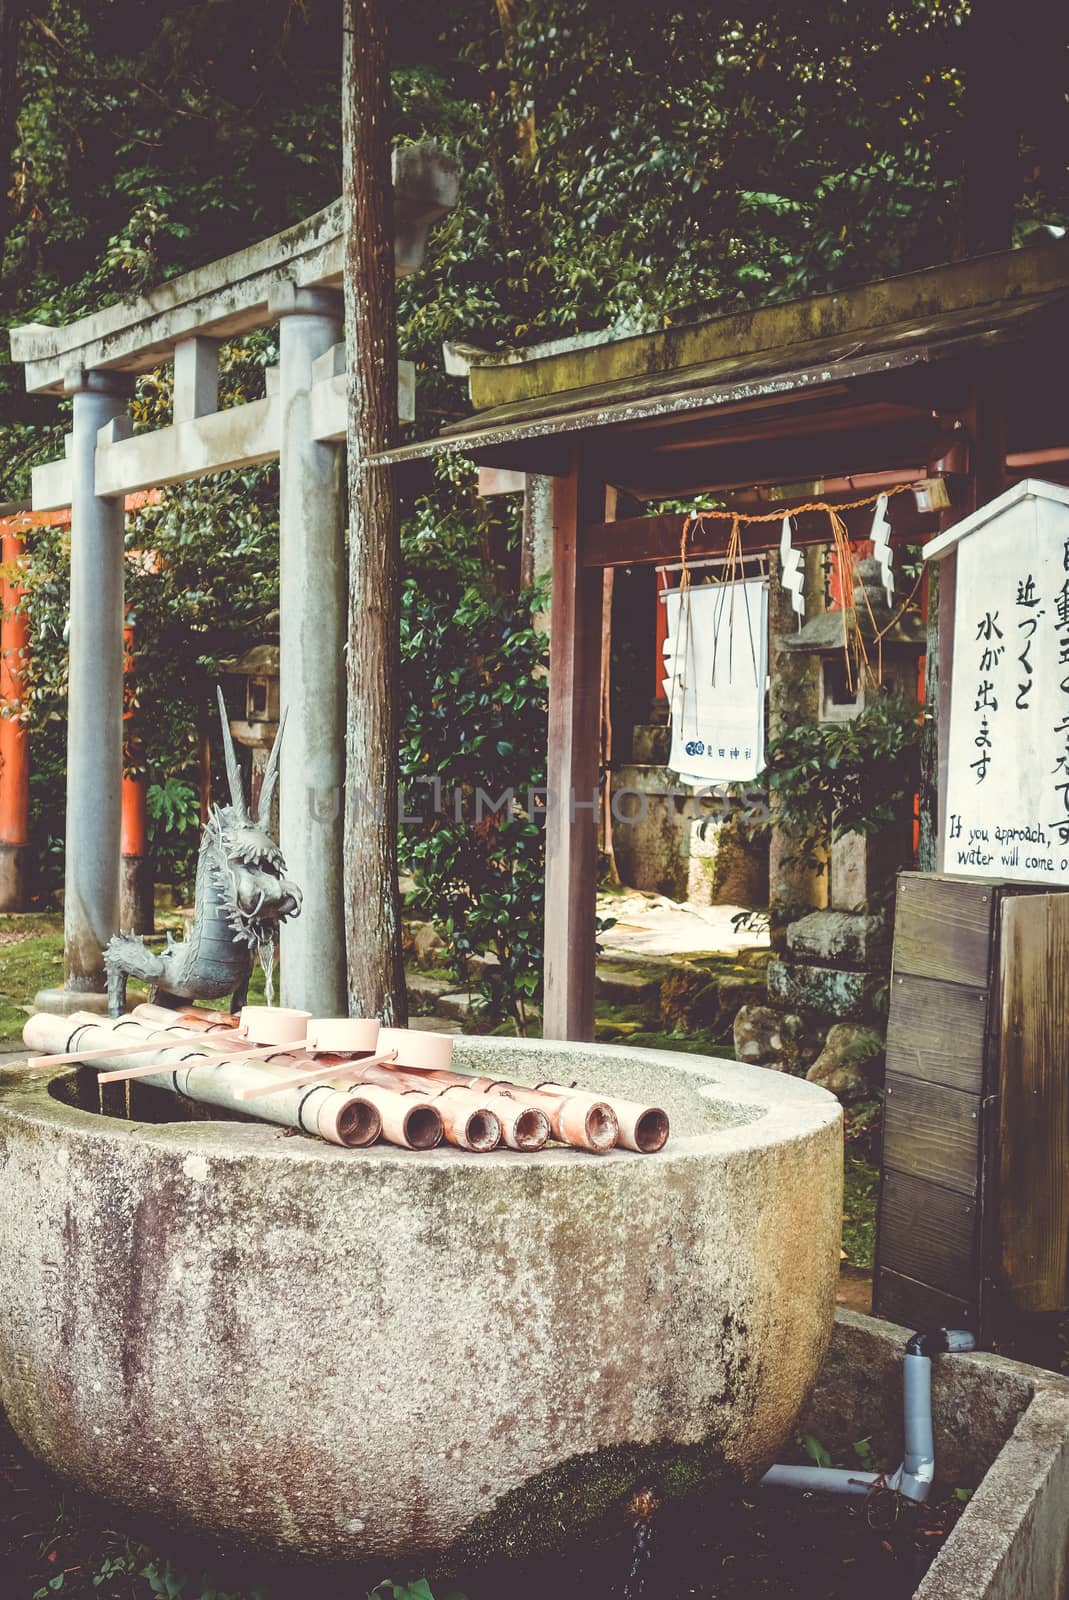 Purification fountain and torii at shoren-in temple, Kyoto, Japan